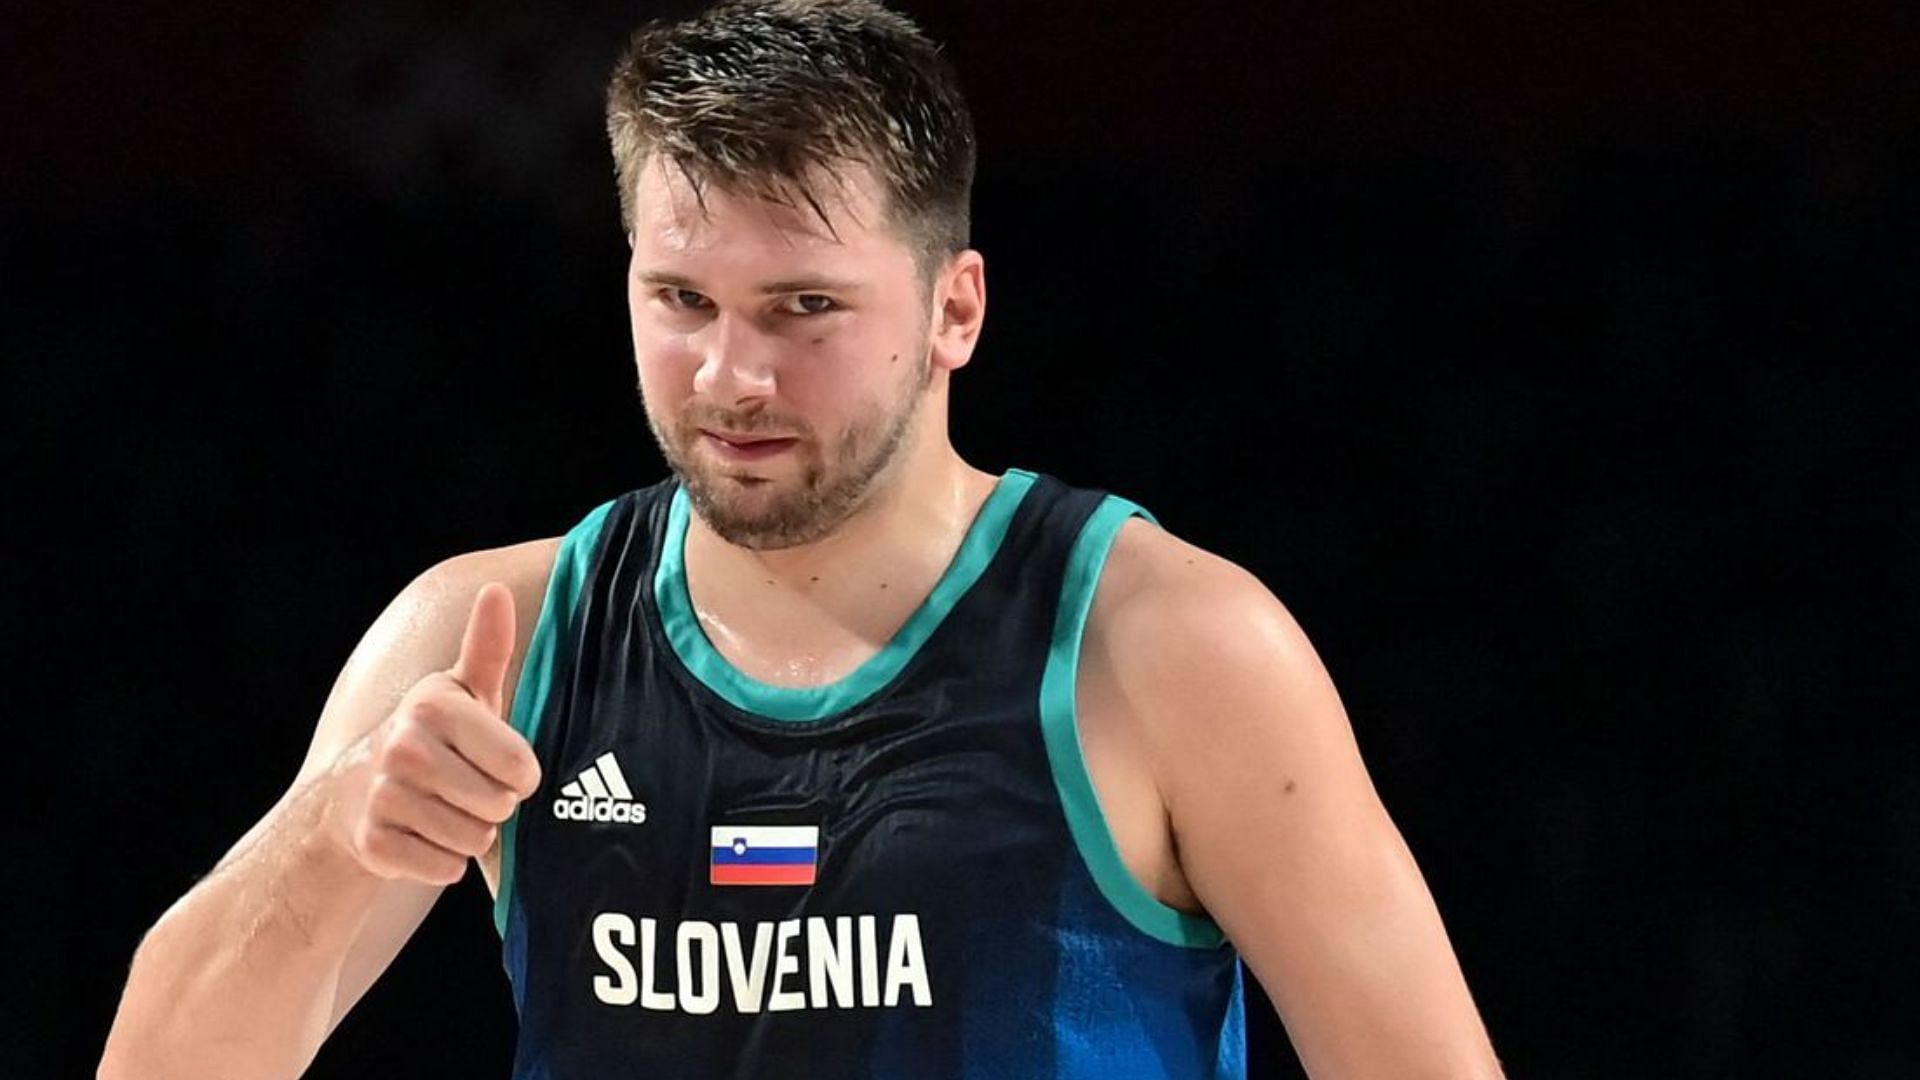 Luka Doncic leads Slovenia